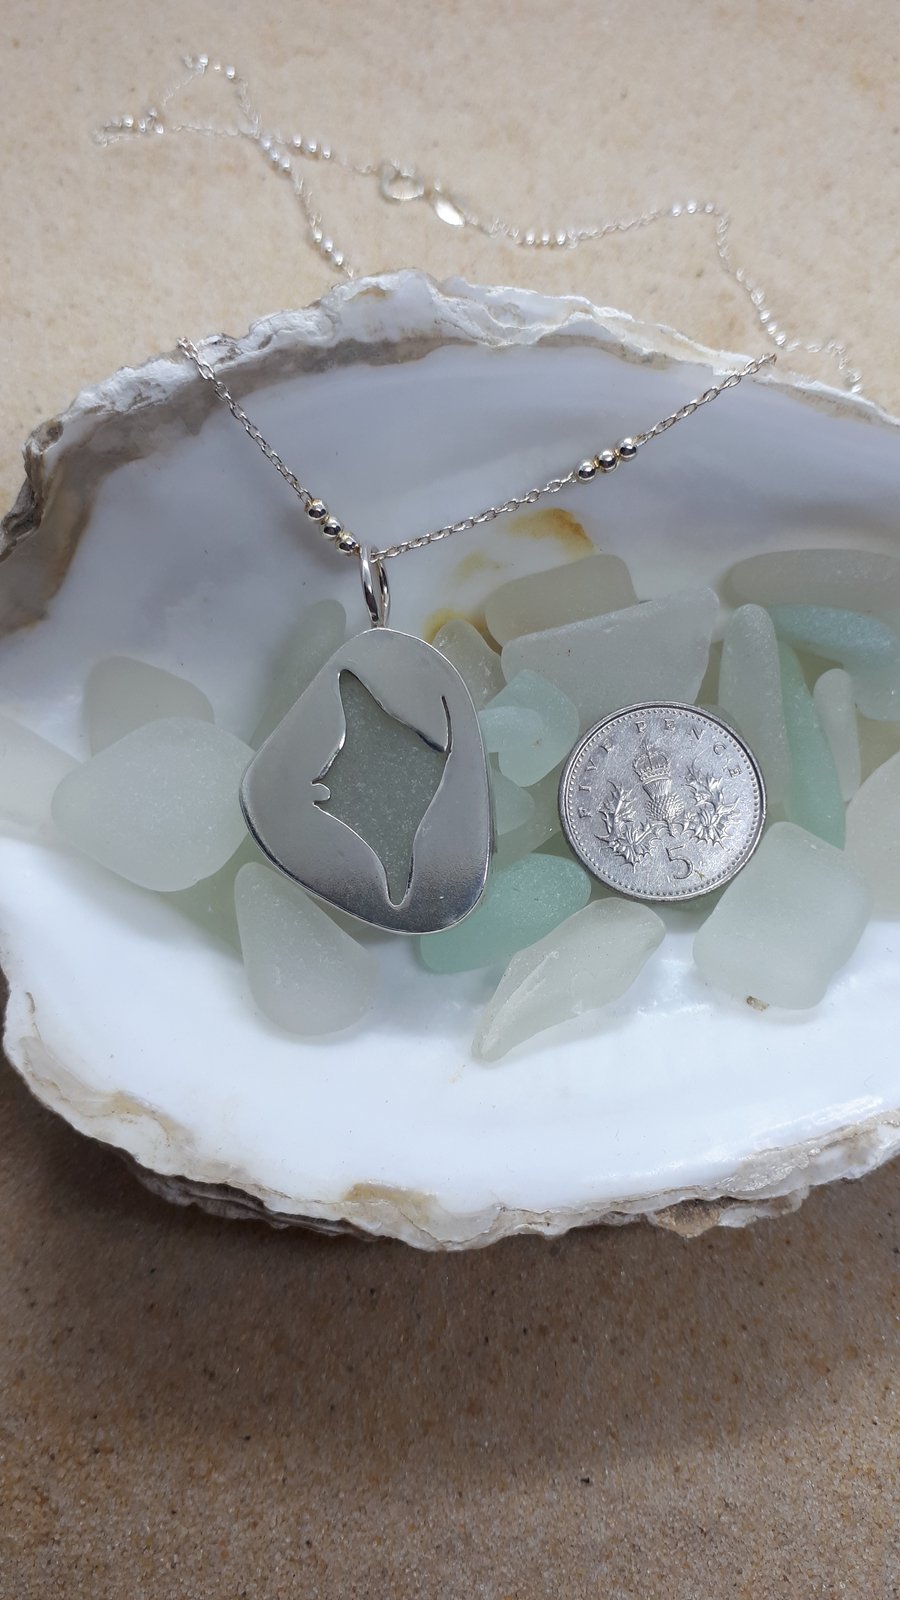 Sea glass and silver manta ray pendant - Seconds Sunday 